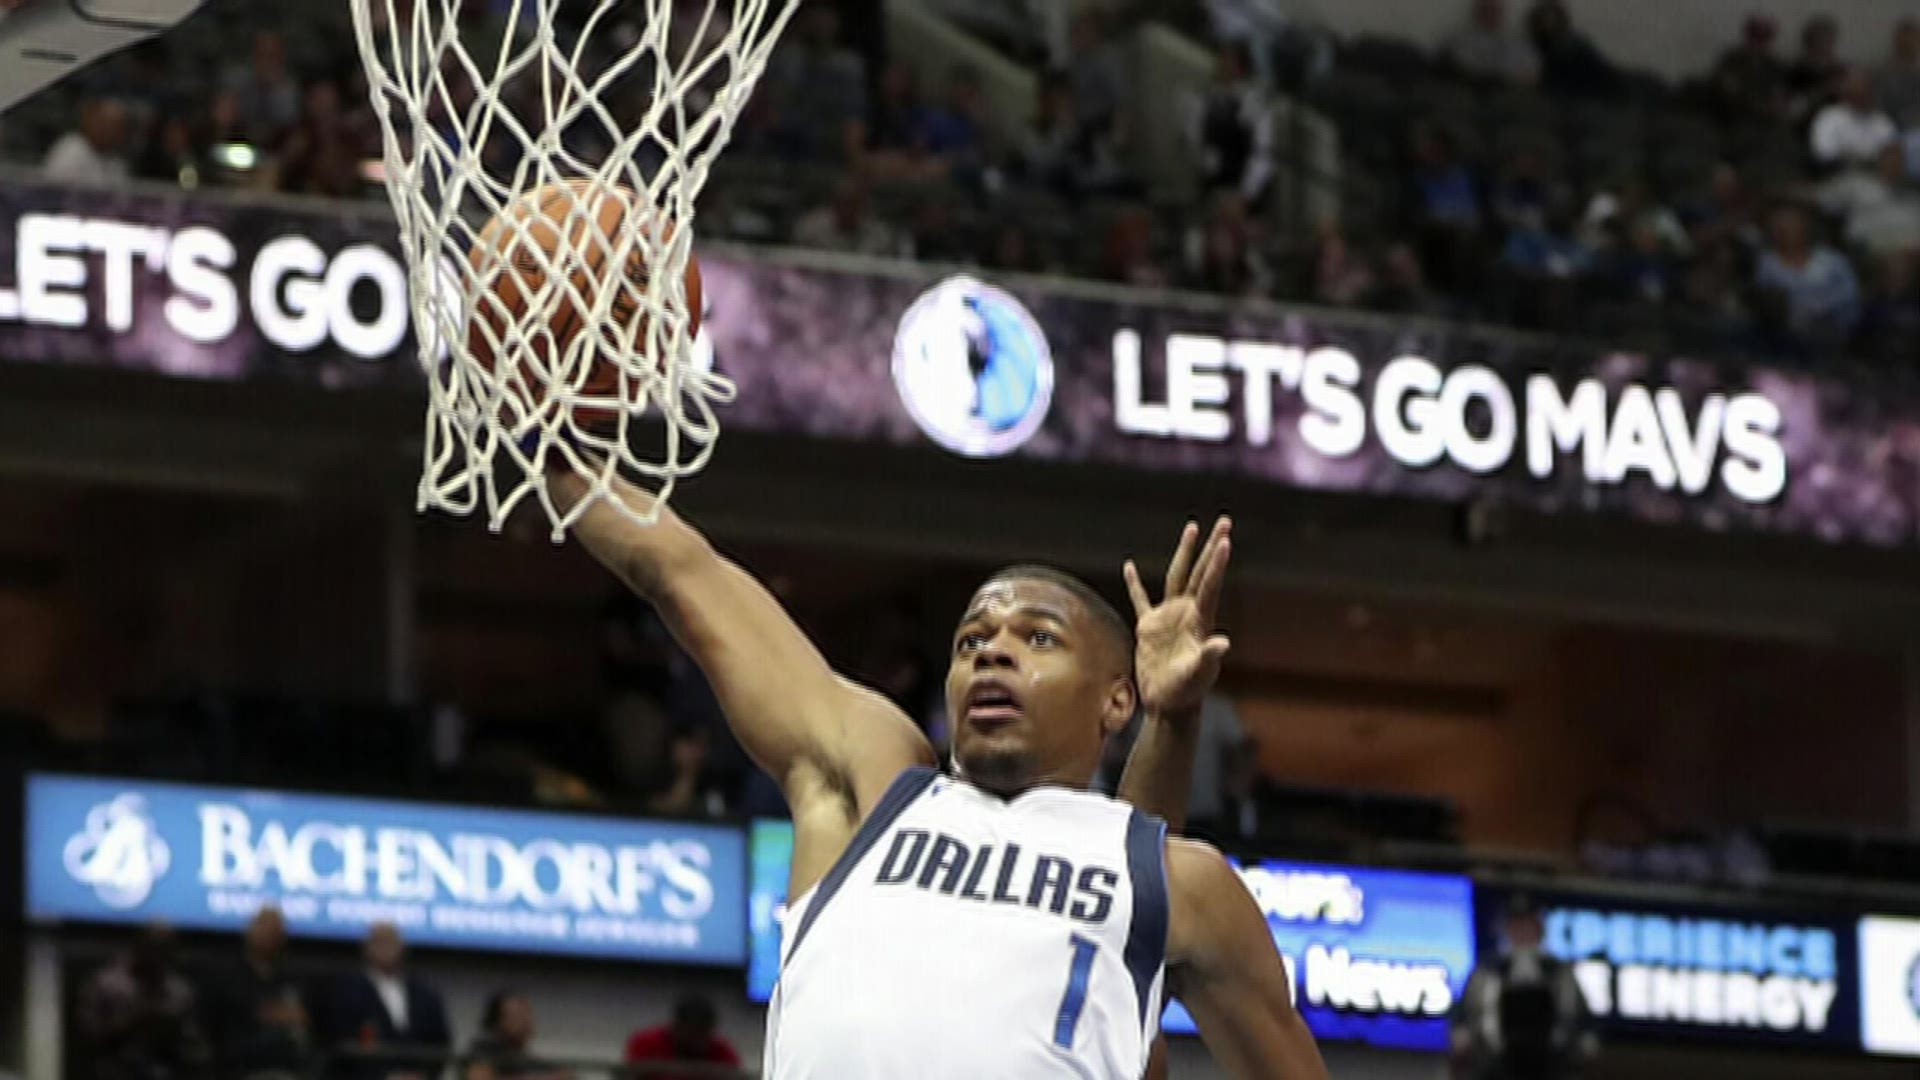 The Mavericks' Dirk Nowitzki starts his 20th NBA season Wednesday night. And rookie point guard Dennis Smith Jr. has created a ton of buzz going into his first season with the Mavs.